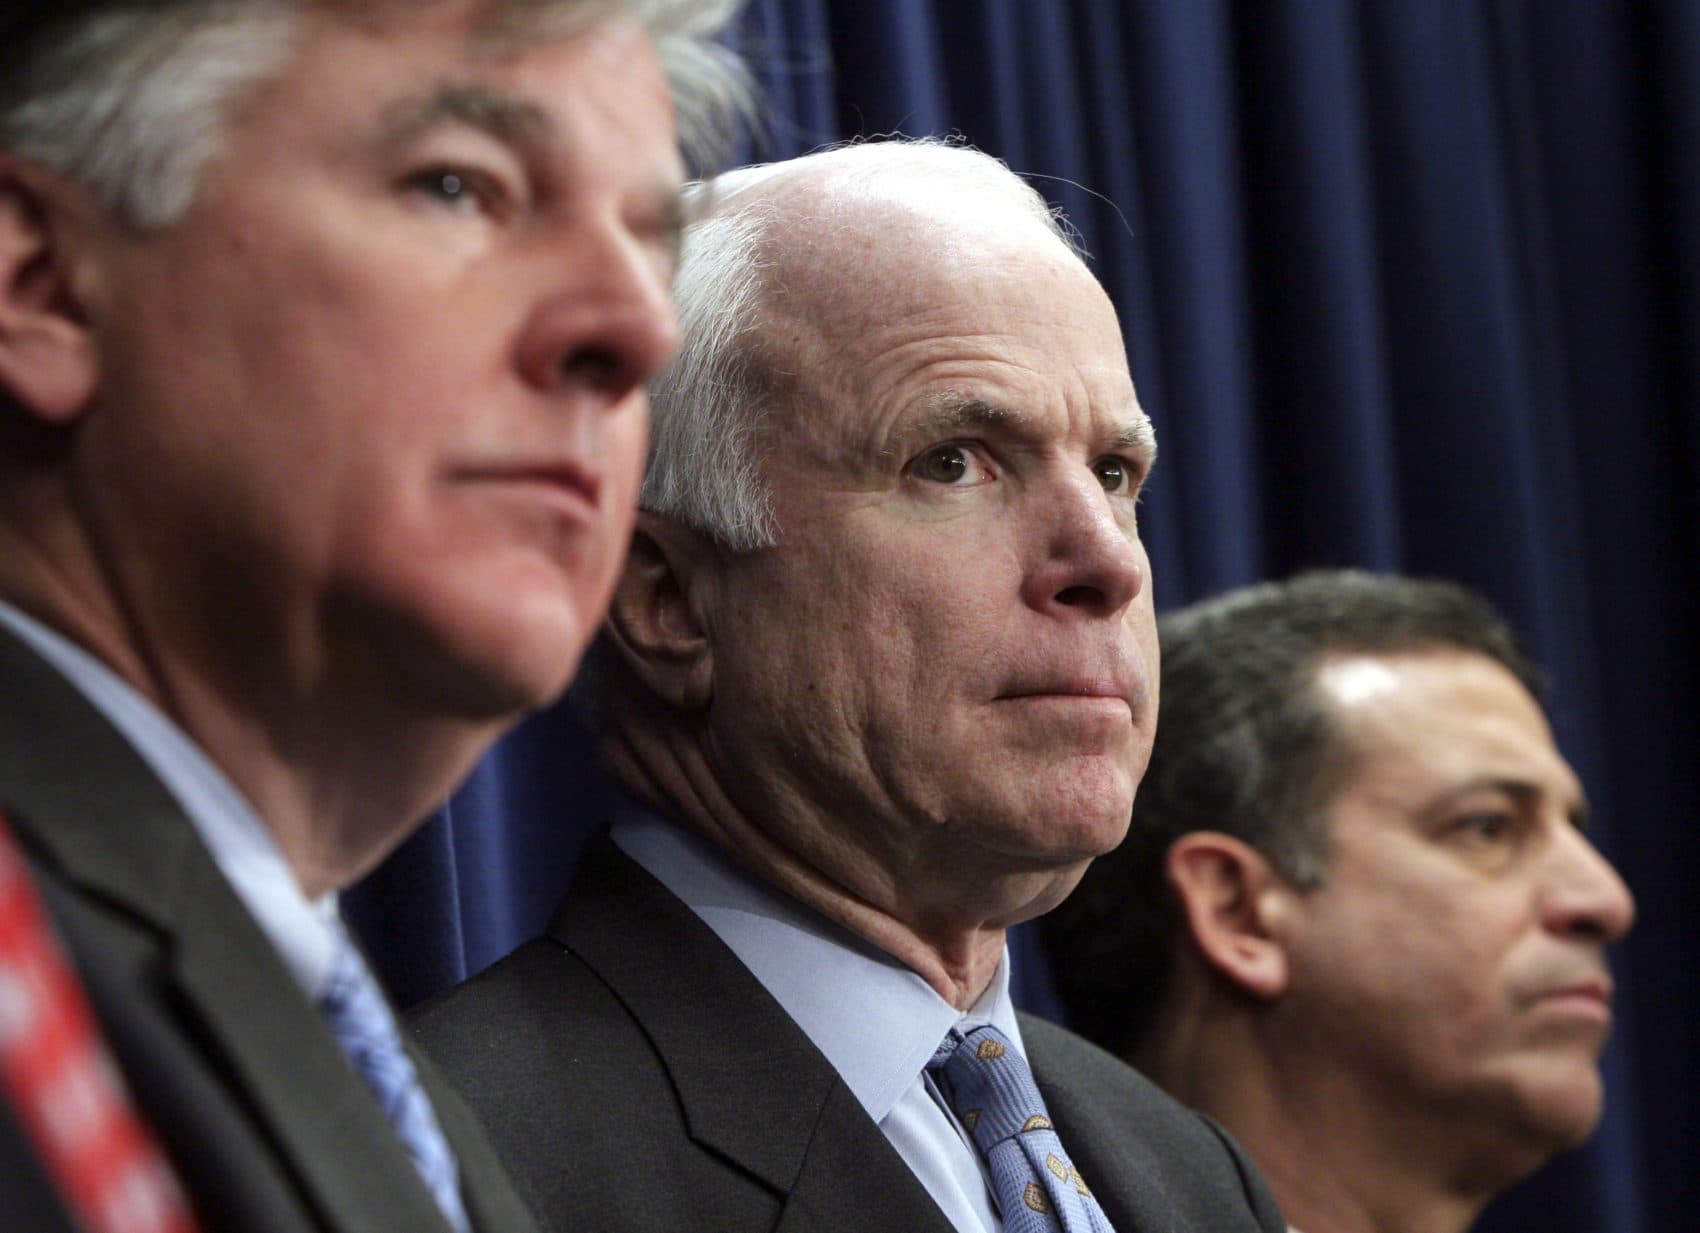 Sen. John McCain, (R-Ariz), Rep. Marty Meehan, (D-Mass.) (left) and Sen. Russell Feingold, (D-Wisc.) participate in a press conference on the importance of passing legislation on lobbying, ethics and earmark reform in the next Congress on Capitol Hill in Washington, D.C., Dec. 5, 2006. (Lauren Victoria Burke/Getty Images)